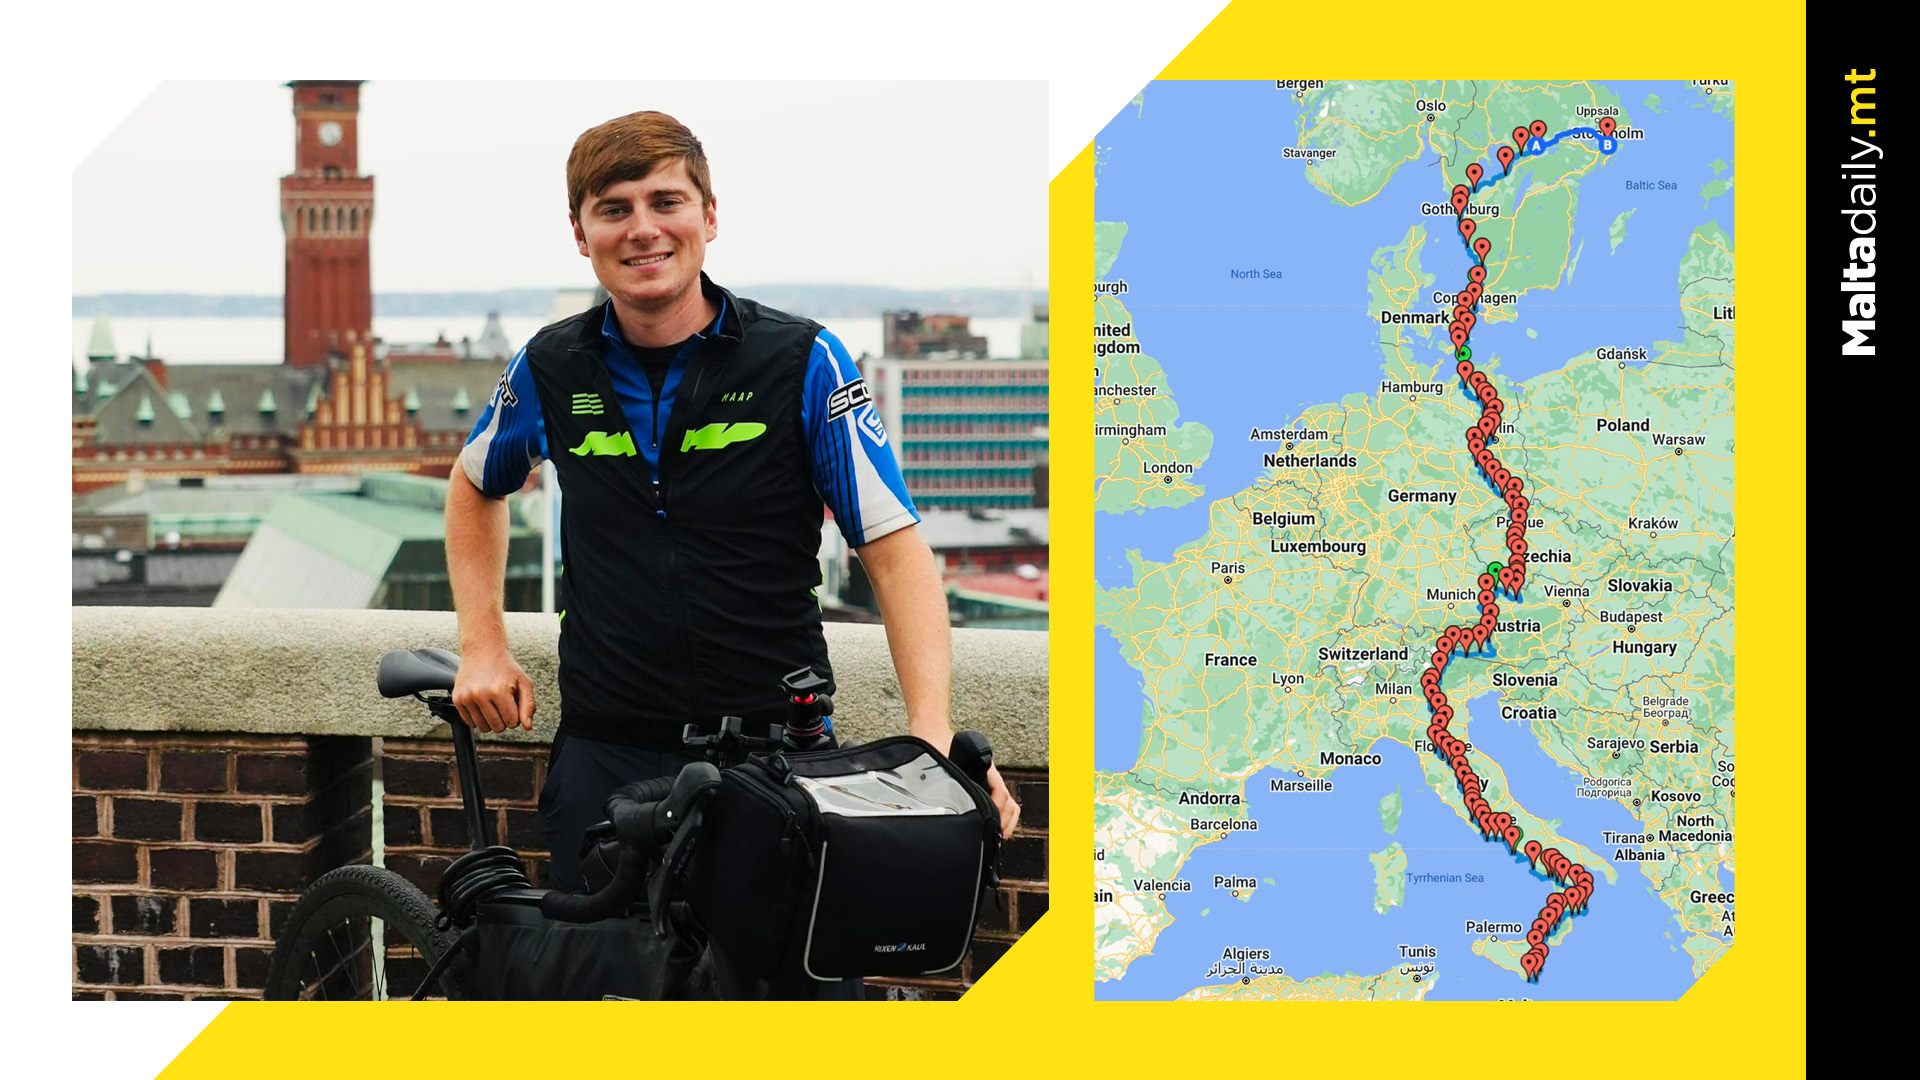 Cycling Activist Steve Zammit Lupi Arrives in Sweden as Part of 500km Journey Across Europe